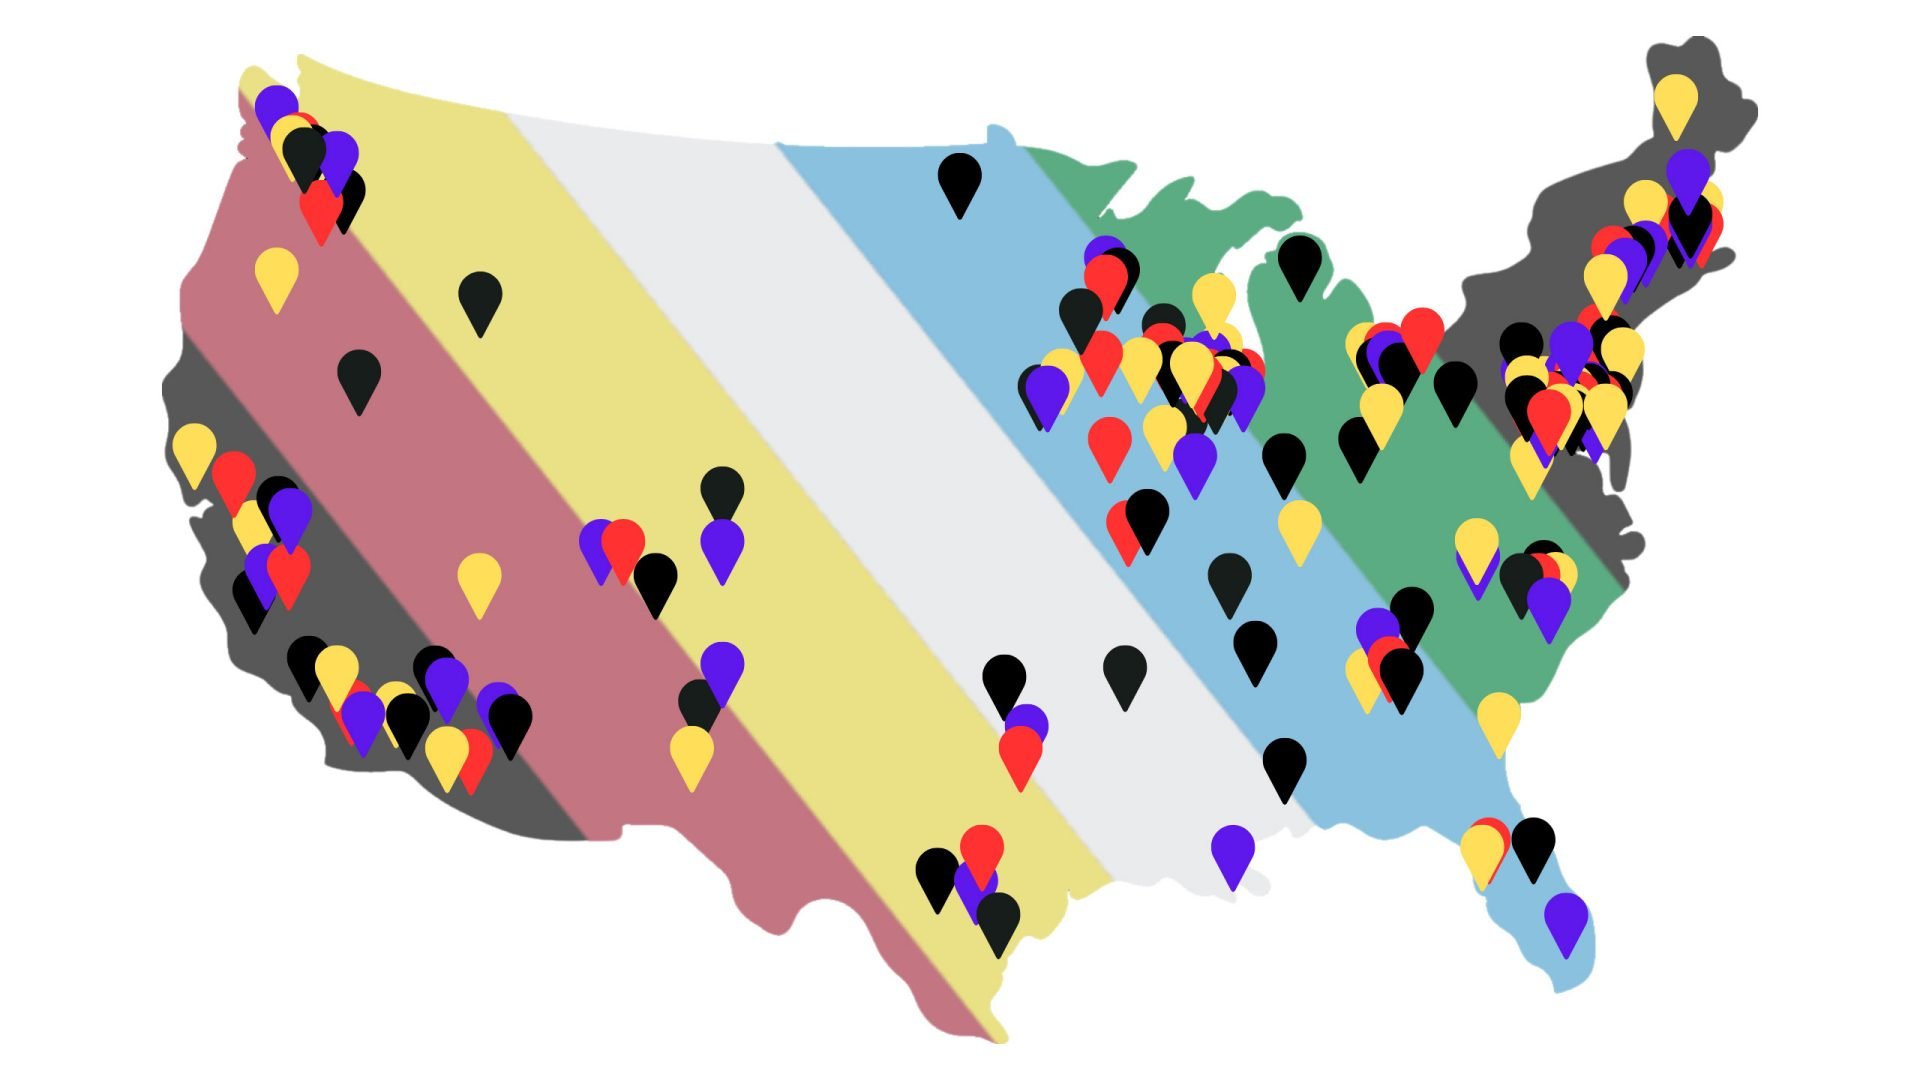 Map of the United States in the colors of the disability pride flag with scattered places markers representing the locations of disabled attorneys